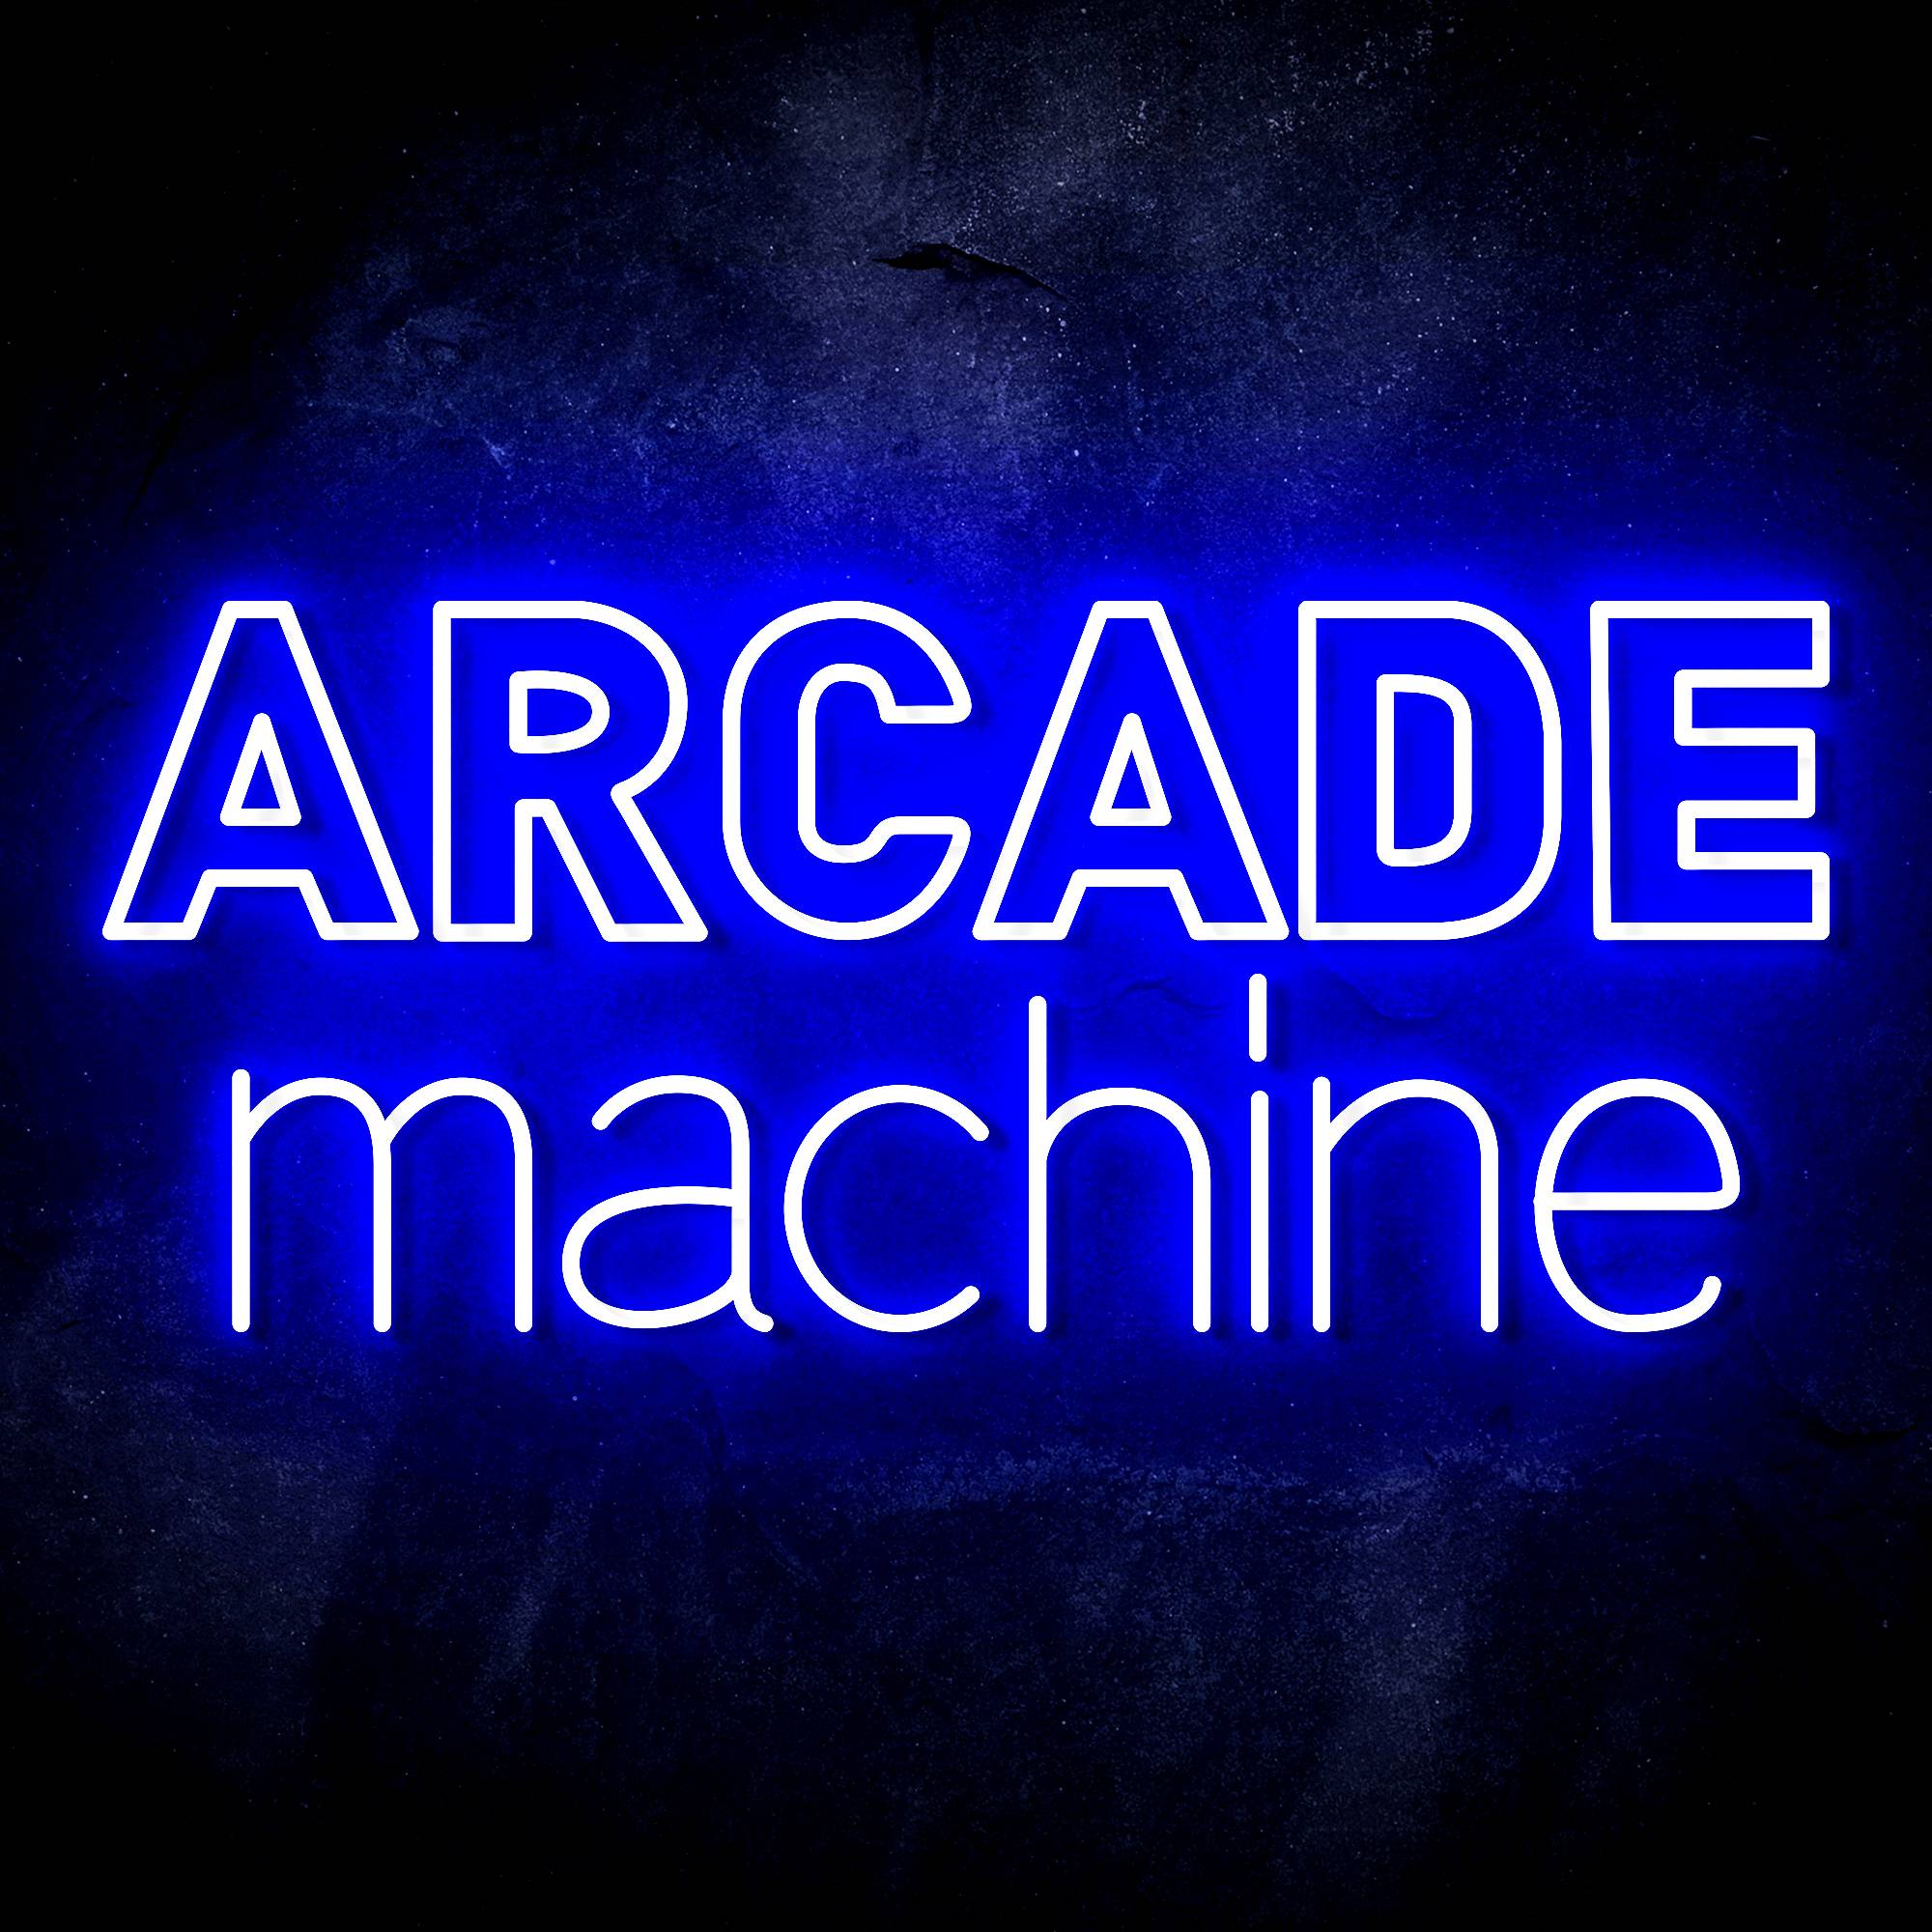 "ARCADE machine" Text Quote LED Neon Sign